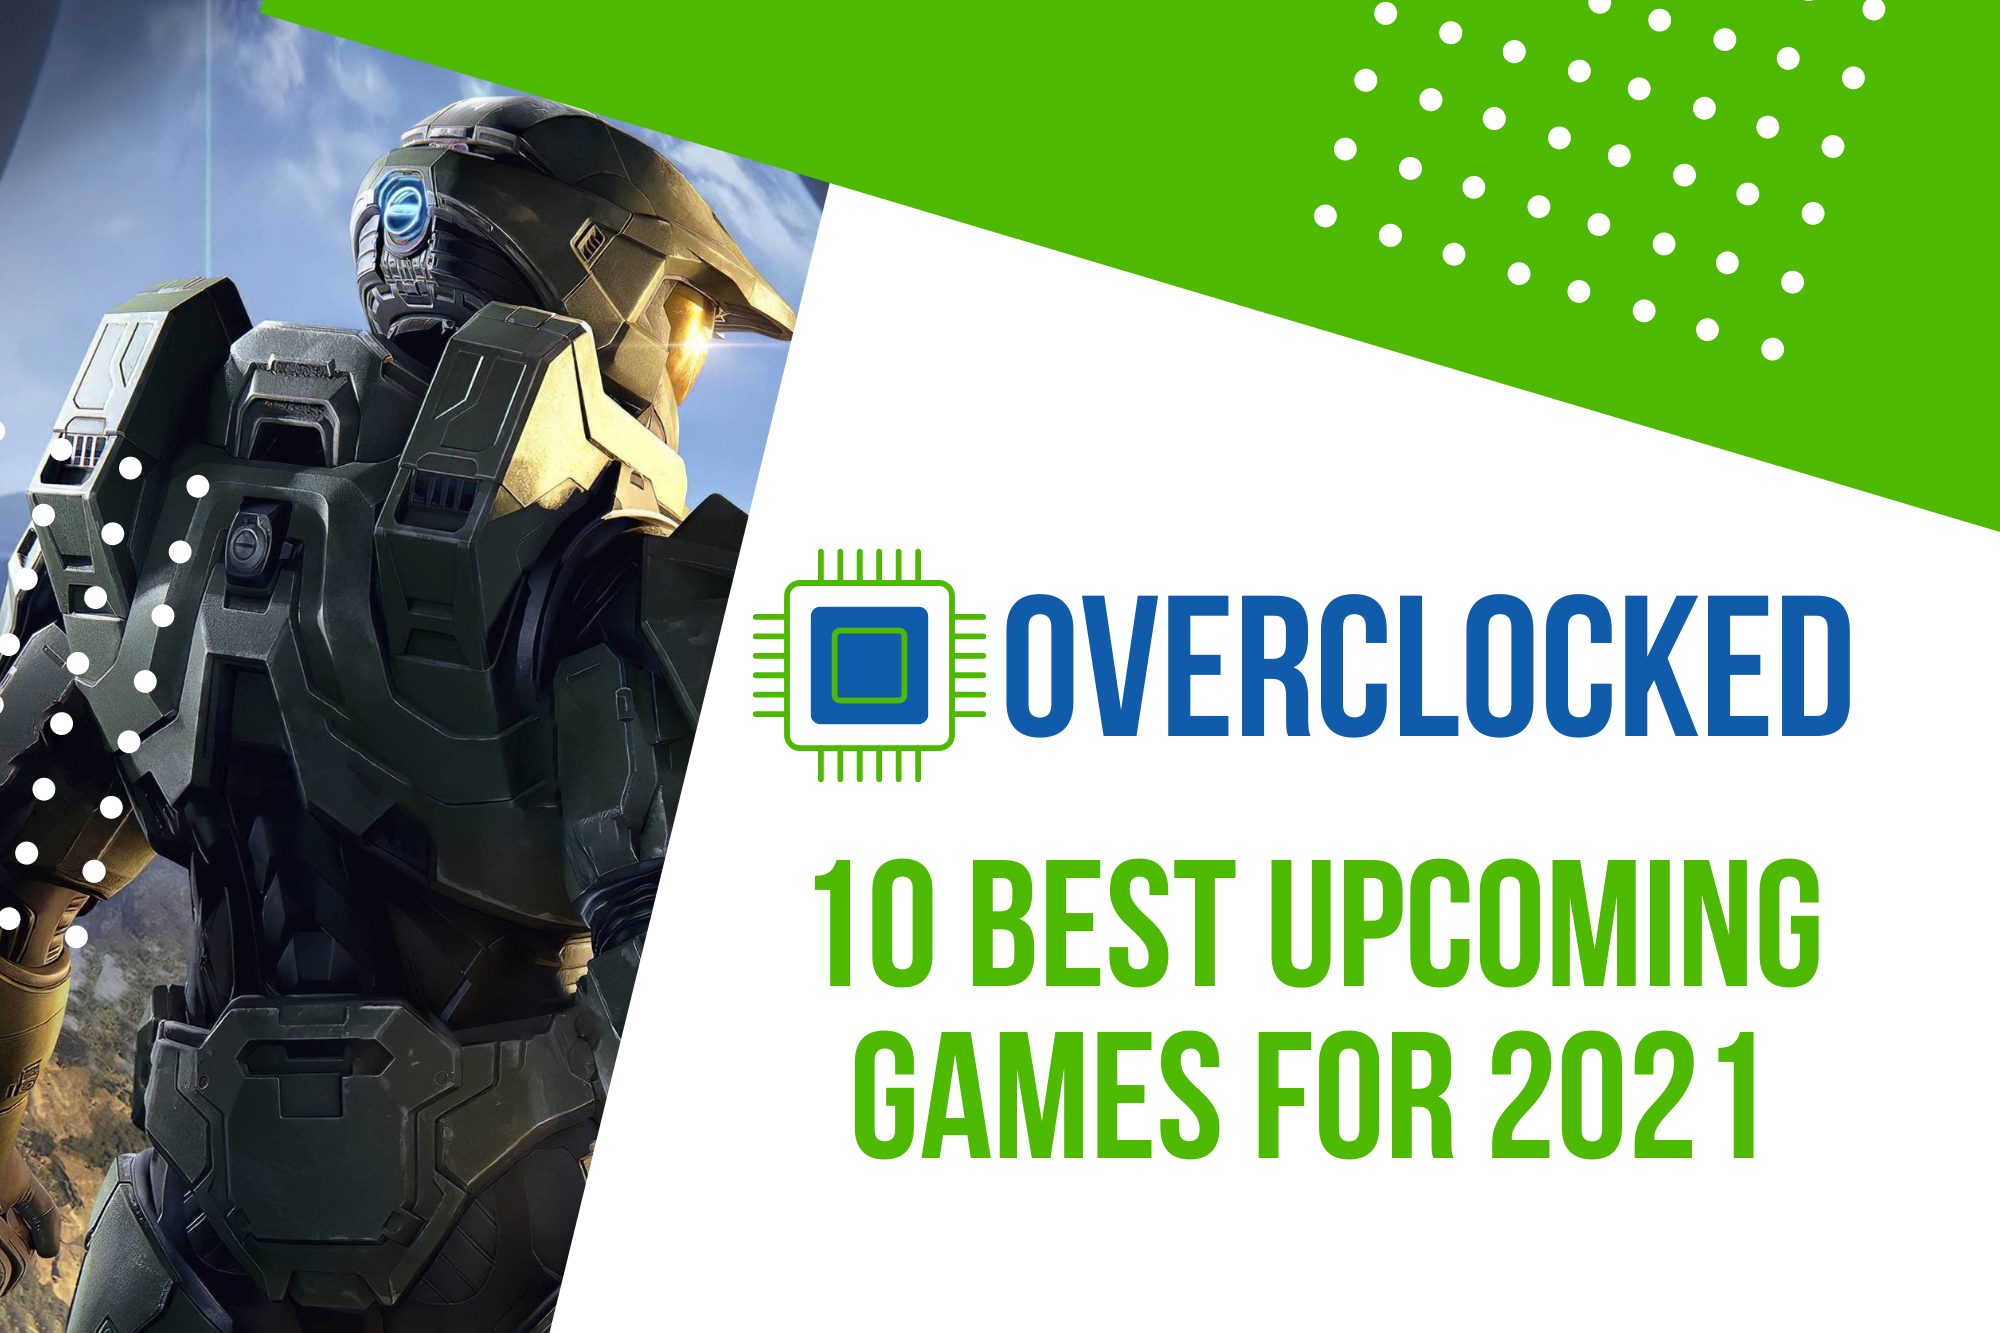 10 Best Upcoming Games For 2021